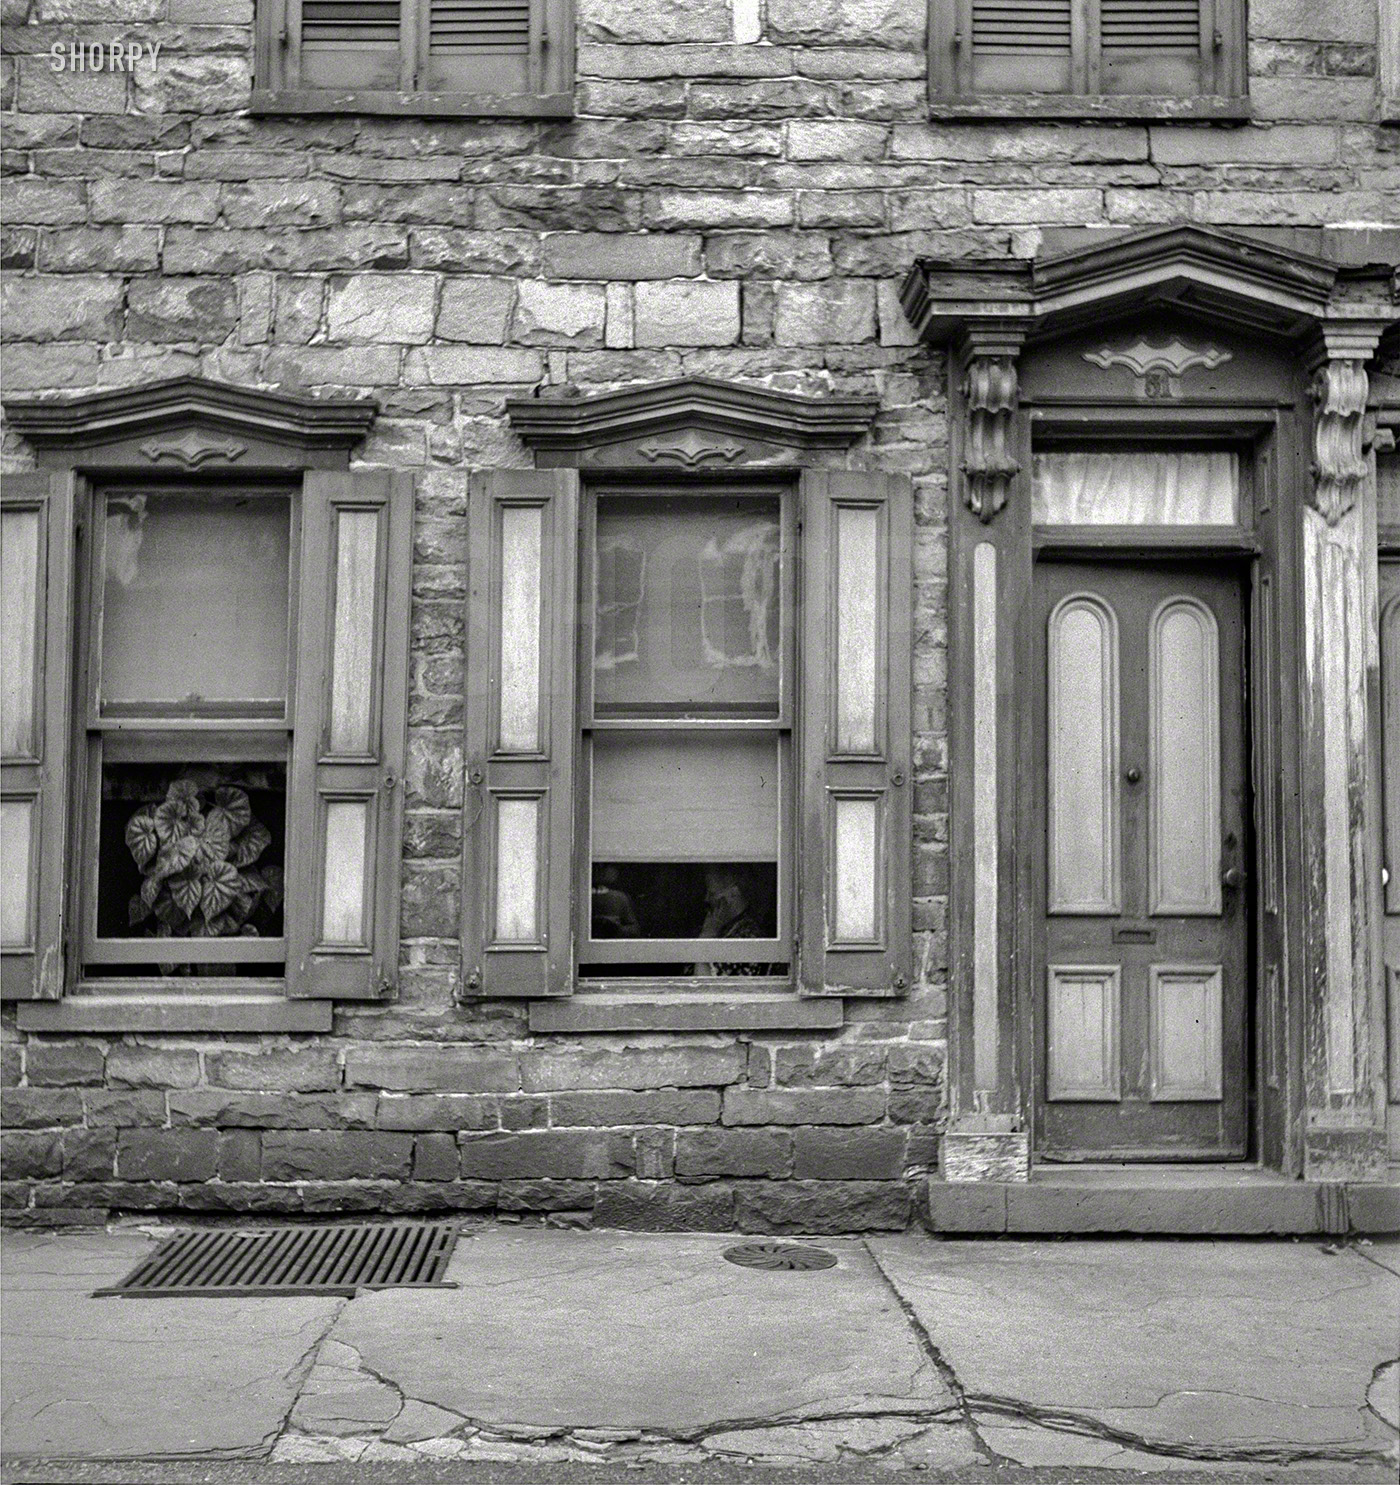 August 1940. "Old house on Race Street in Mauch Chunk, Pennsylvania." Photo by Jack Delano for the Resettlement Administration. View full size.